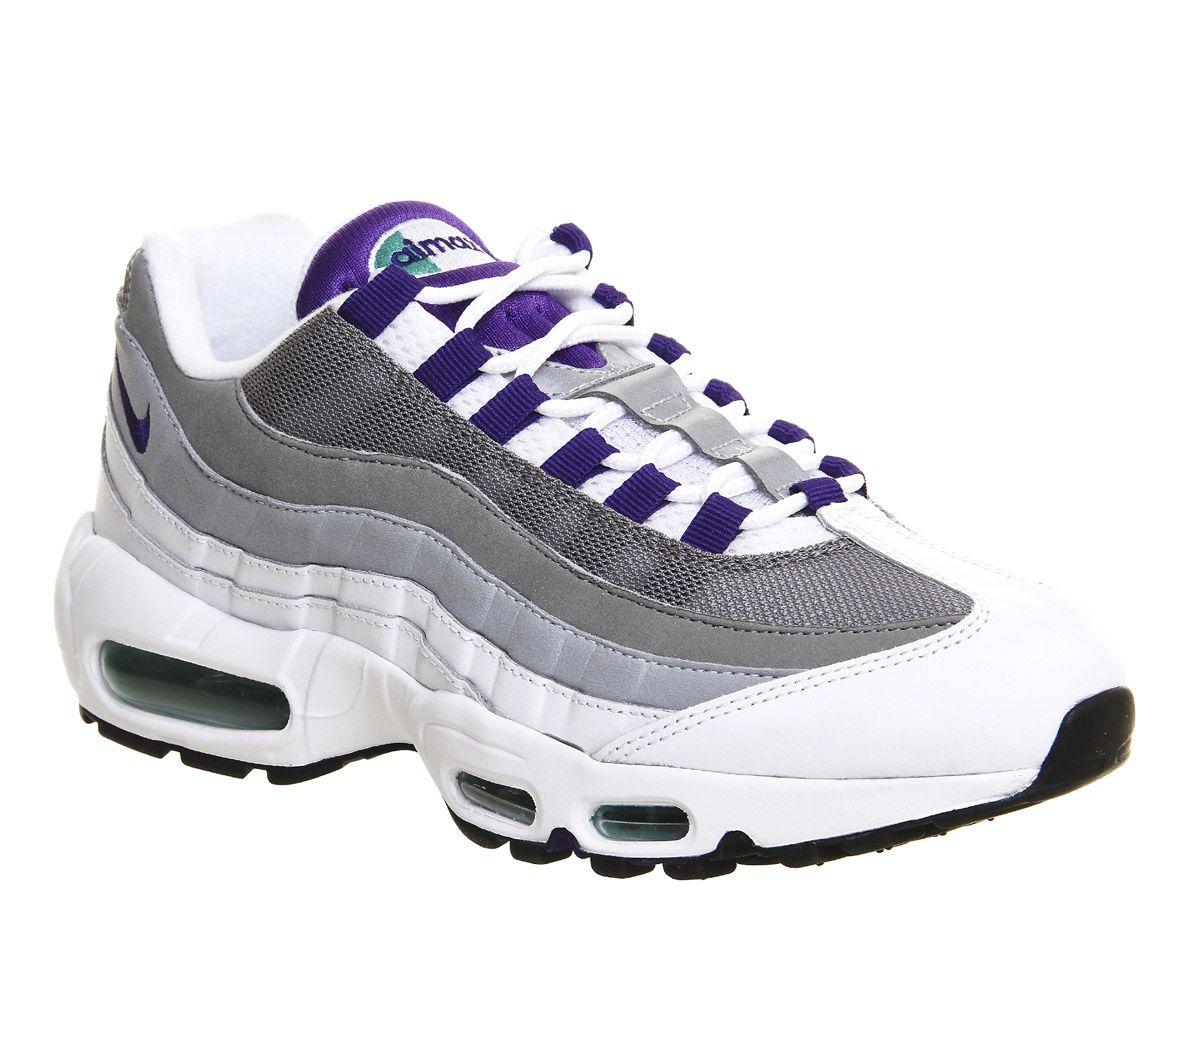 White and Purple Wolf Logo - Nike Air Max 95 White Court Purple Wolf Grey (m) - His trainers